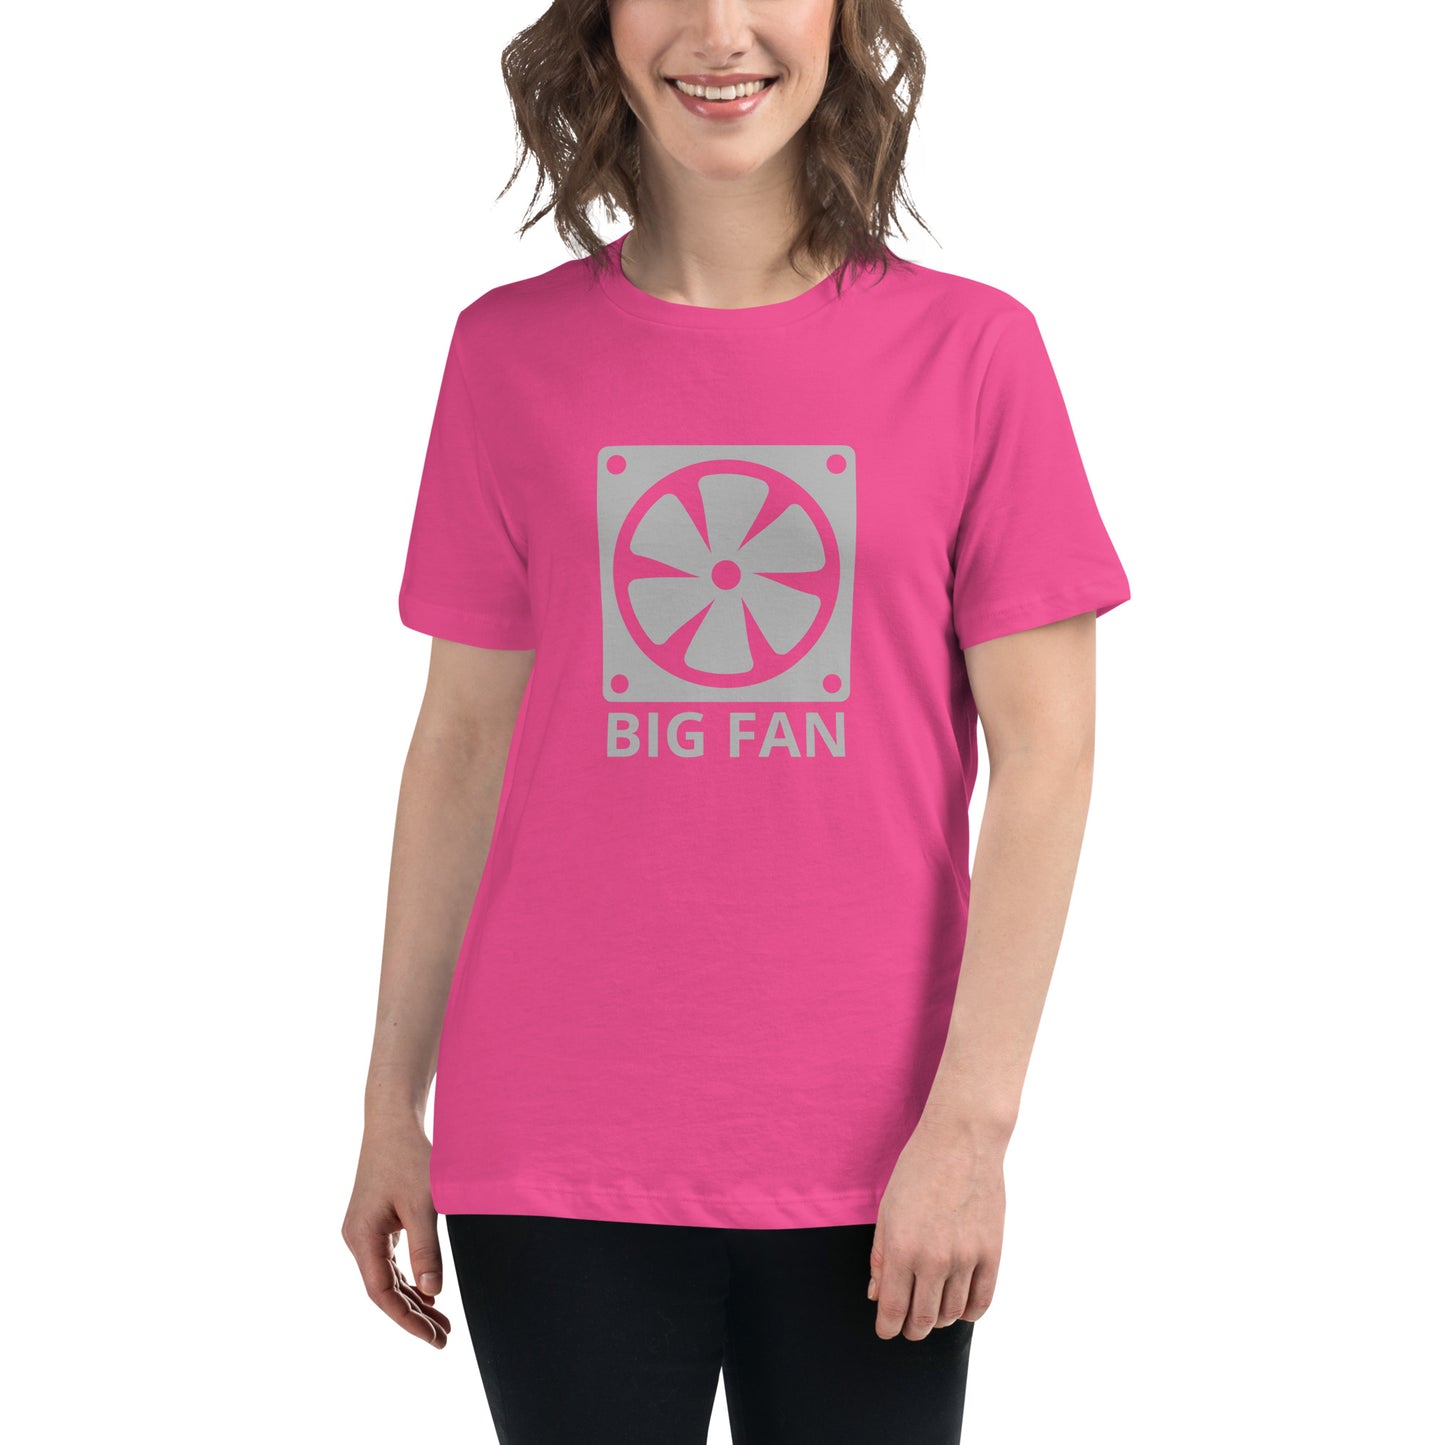 Women with berry t-shirt with image of a big computer fan and the text "BIG FAN"